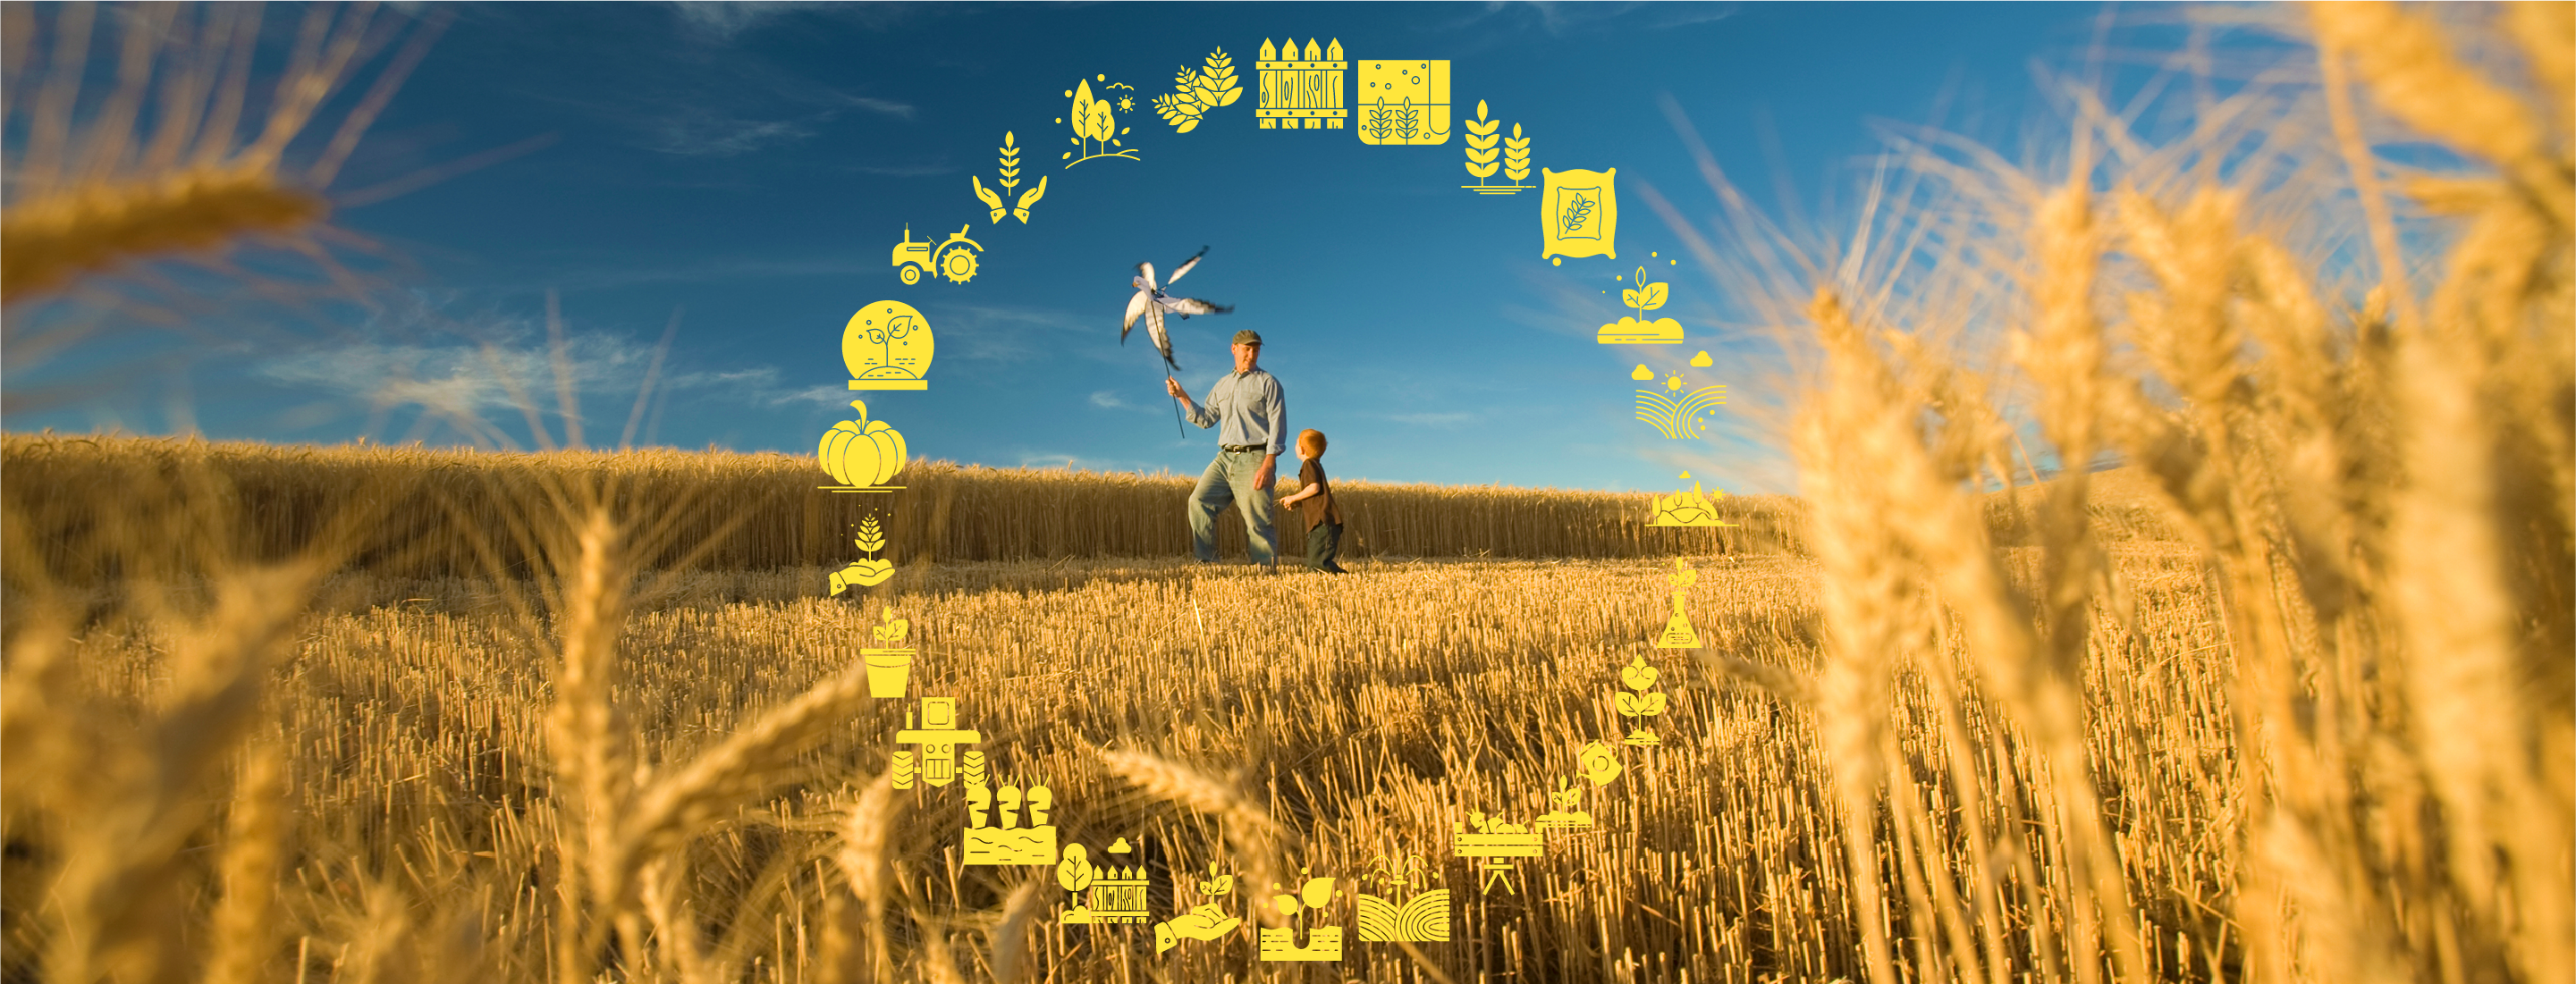 Child and man holding pinwheel walk among crop rows encircled by app icons